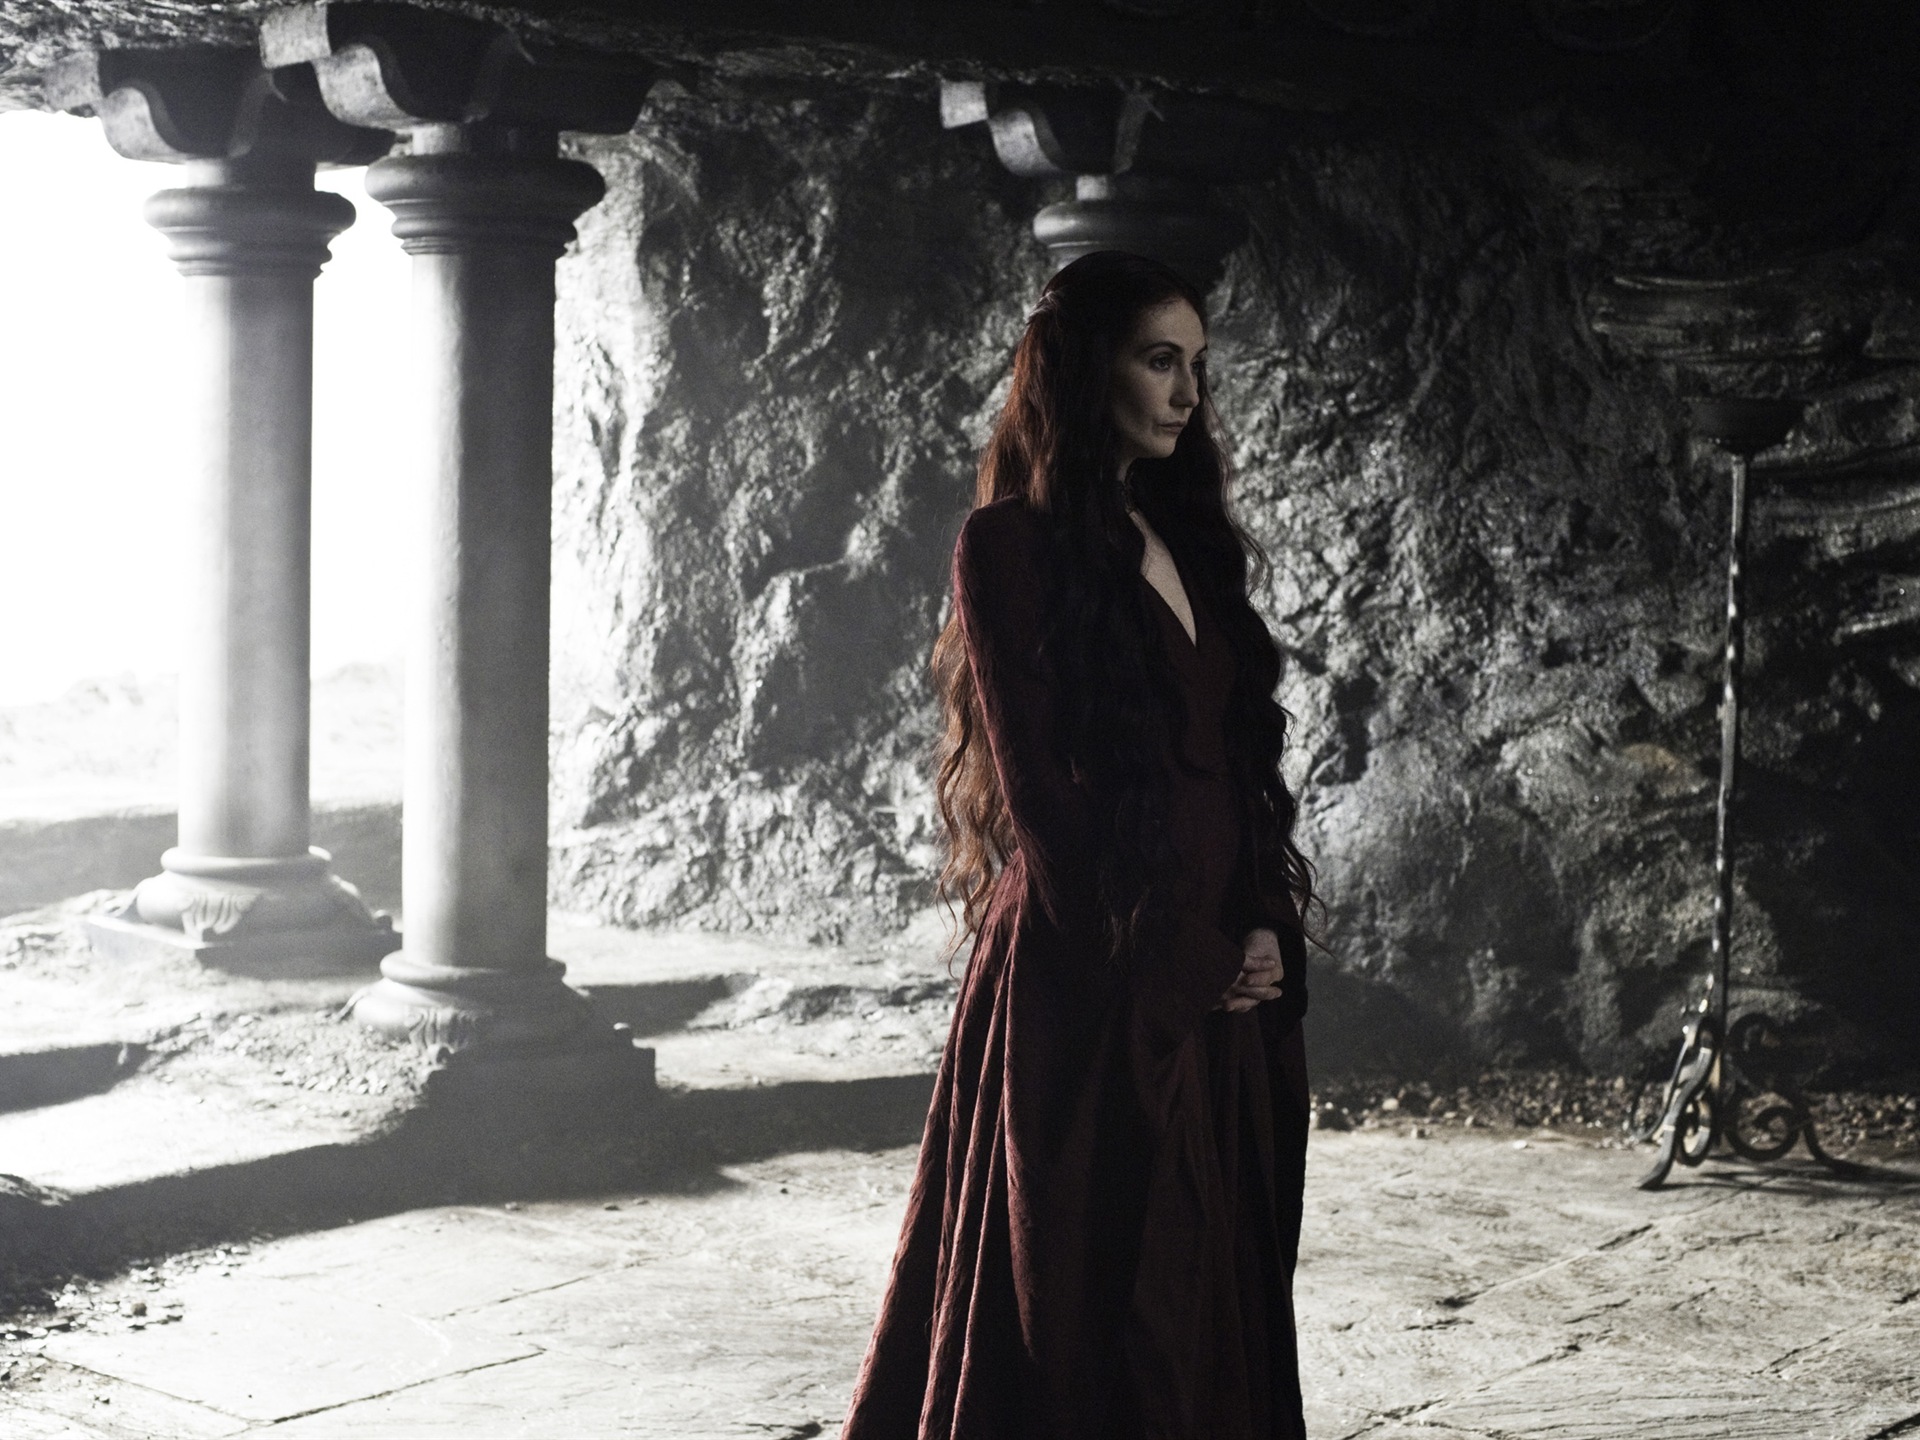 A Song of Ice and Fire: Game of Thrones 冰與火之歌：權力的遊戲高清壁紙 #34 - 1920x1440